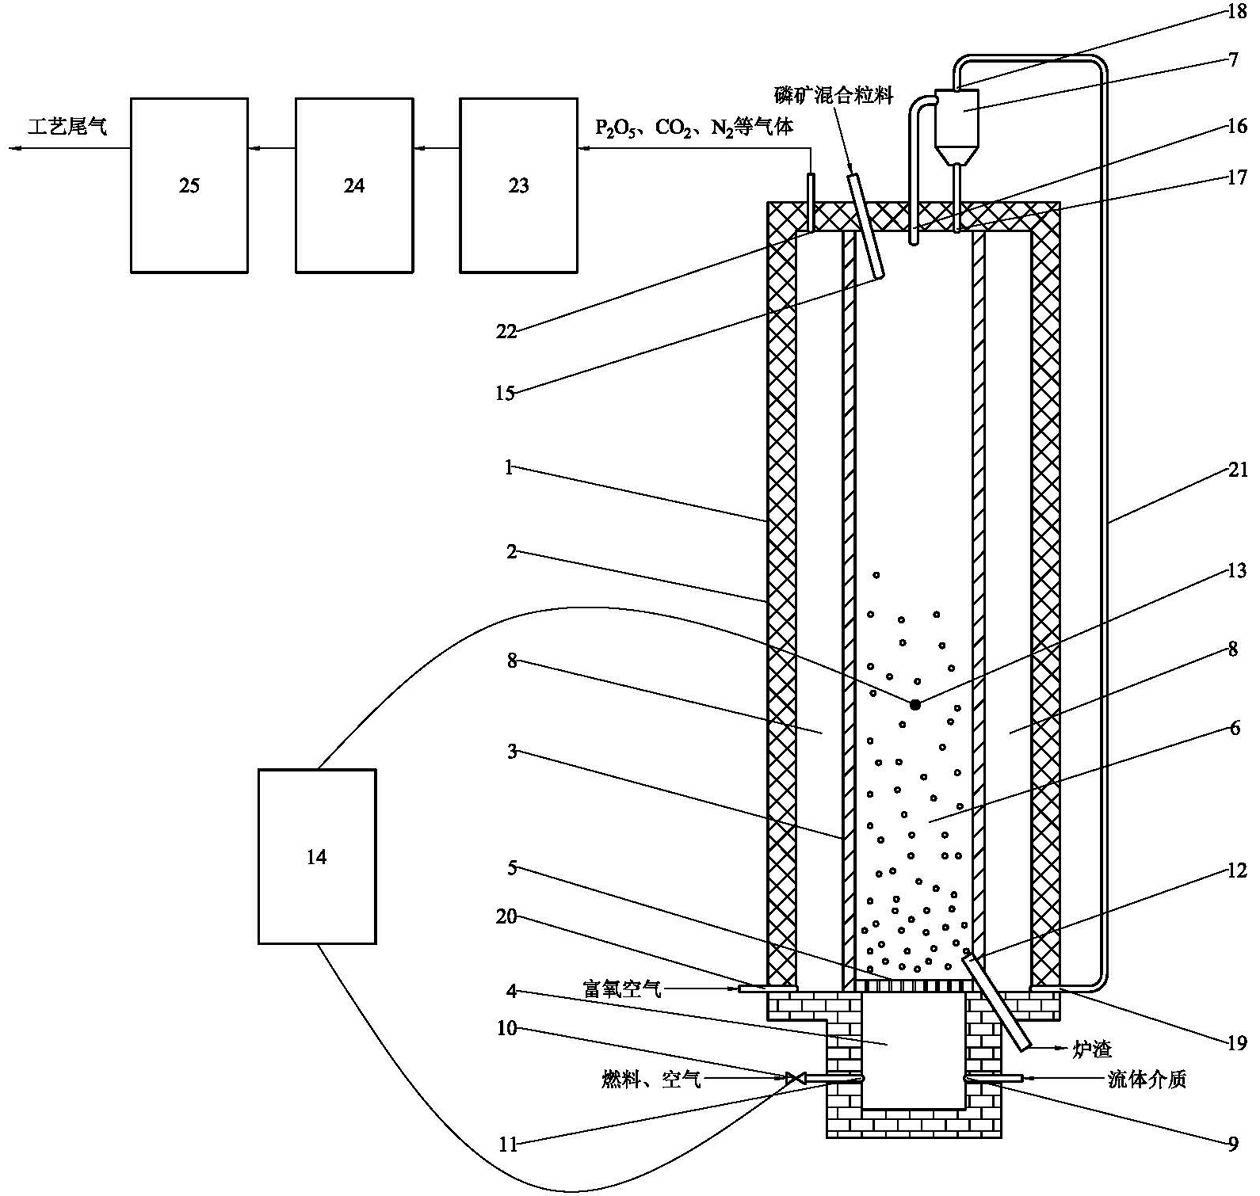 Technique and device for preparing phosphoric acid by fluidized bed reactor